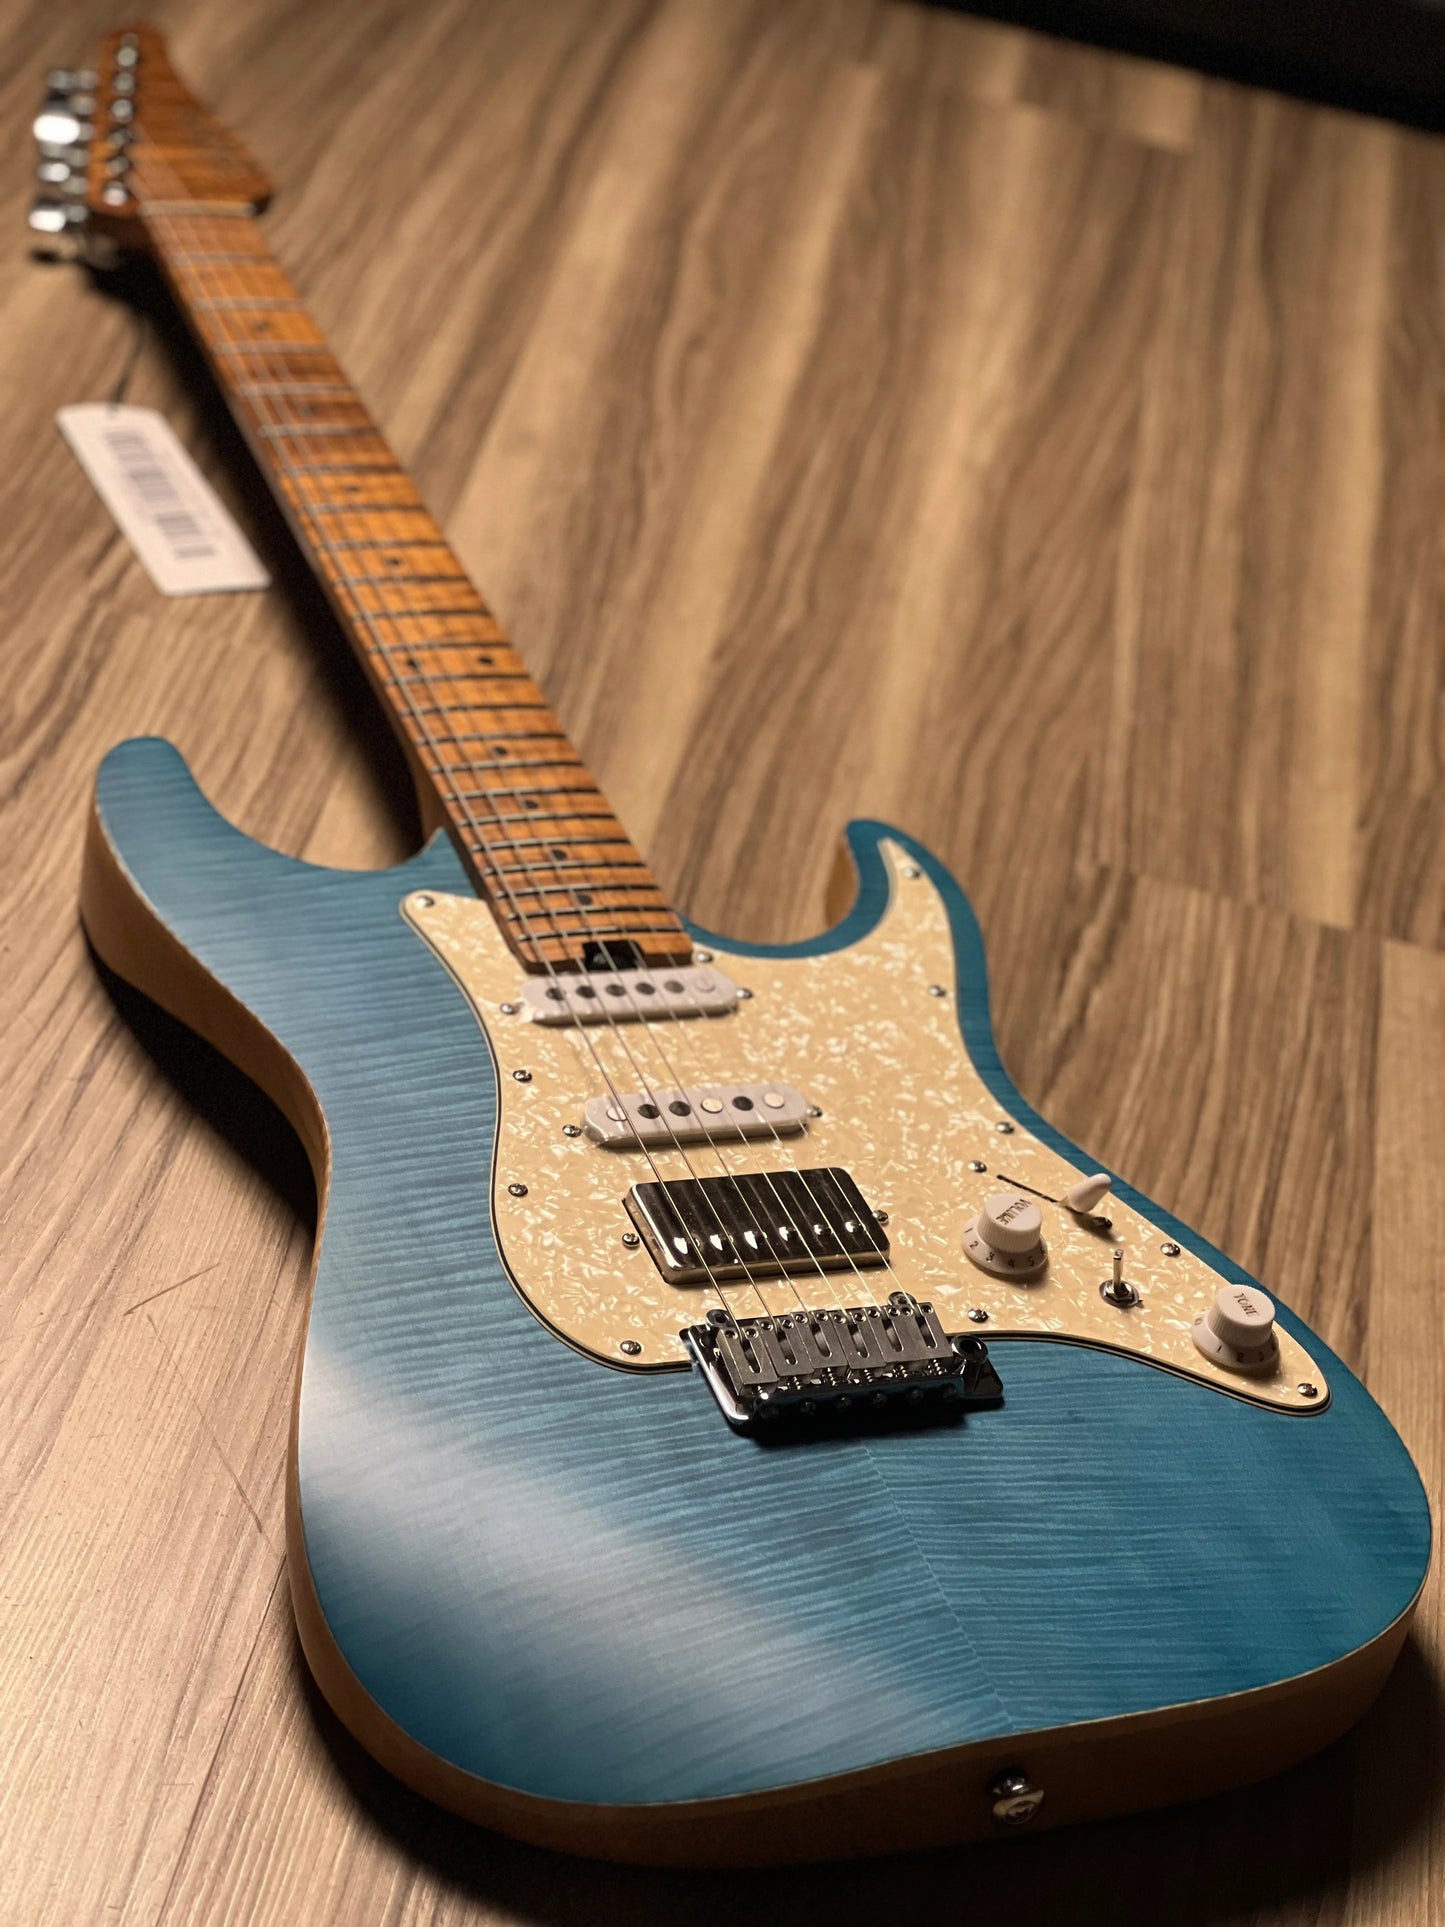 Soloking MS-1 Classic Flat Top FMN Roasted Flame Maple Neck in Jeans Pacific Blue